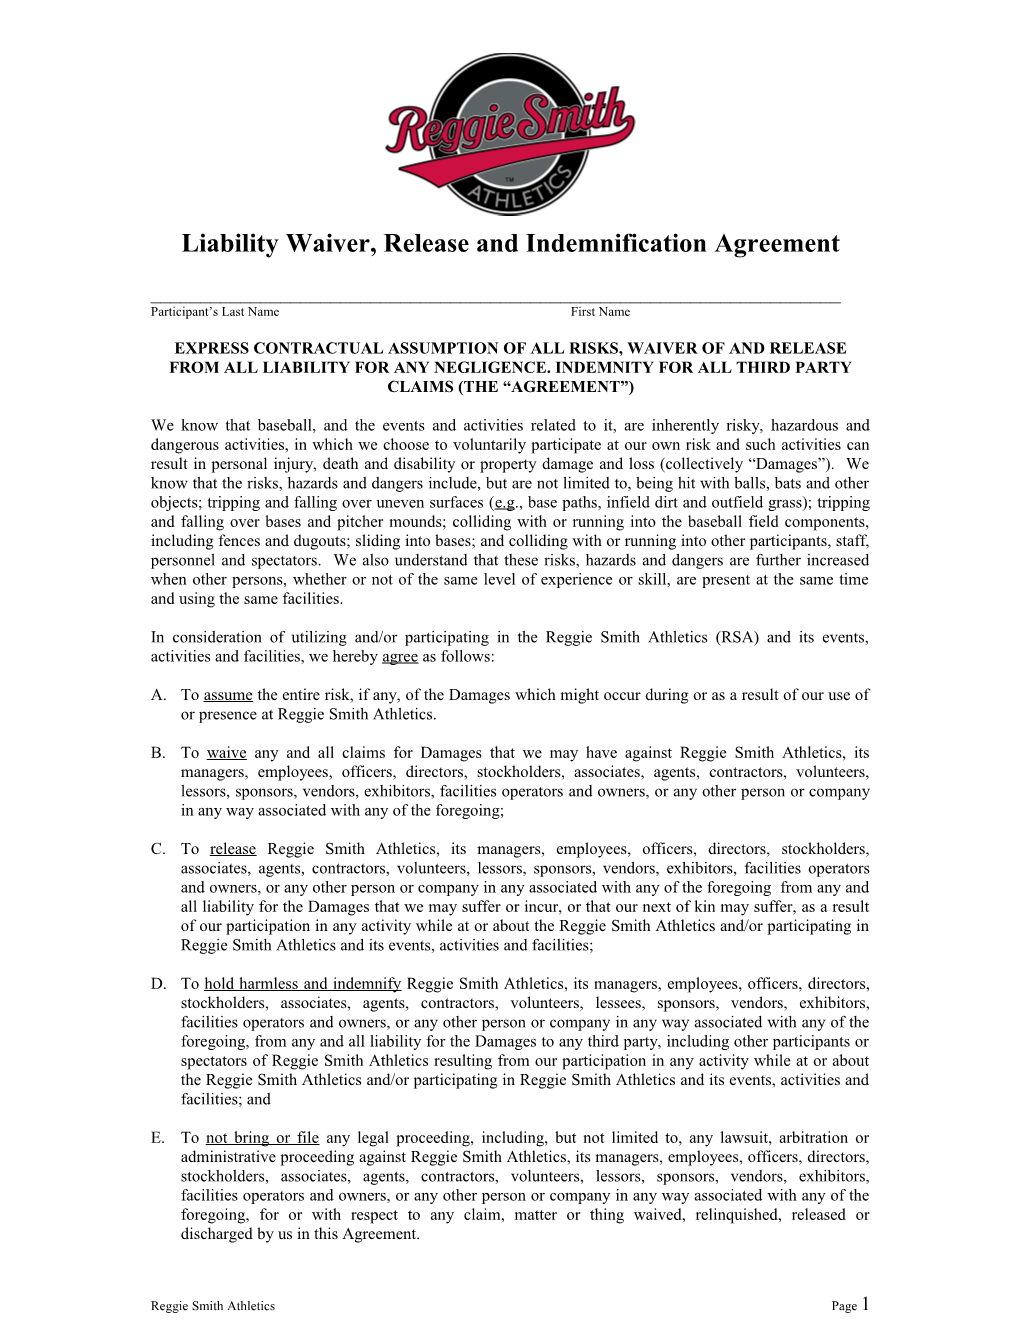 Liability Waiver, Release and Indemnification Agreement